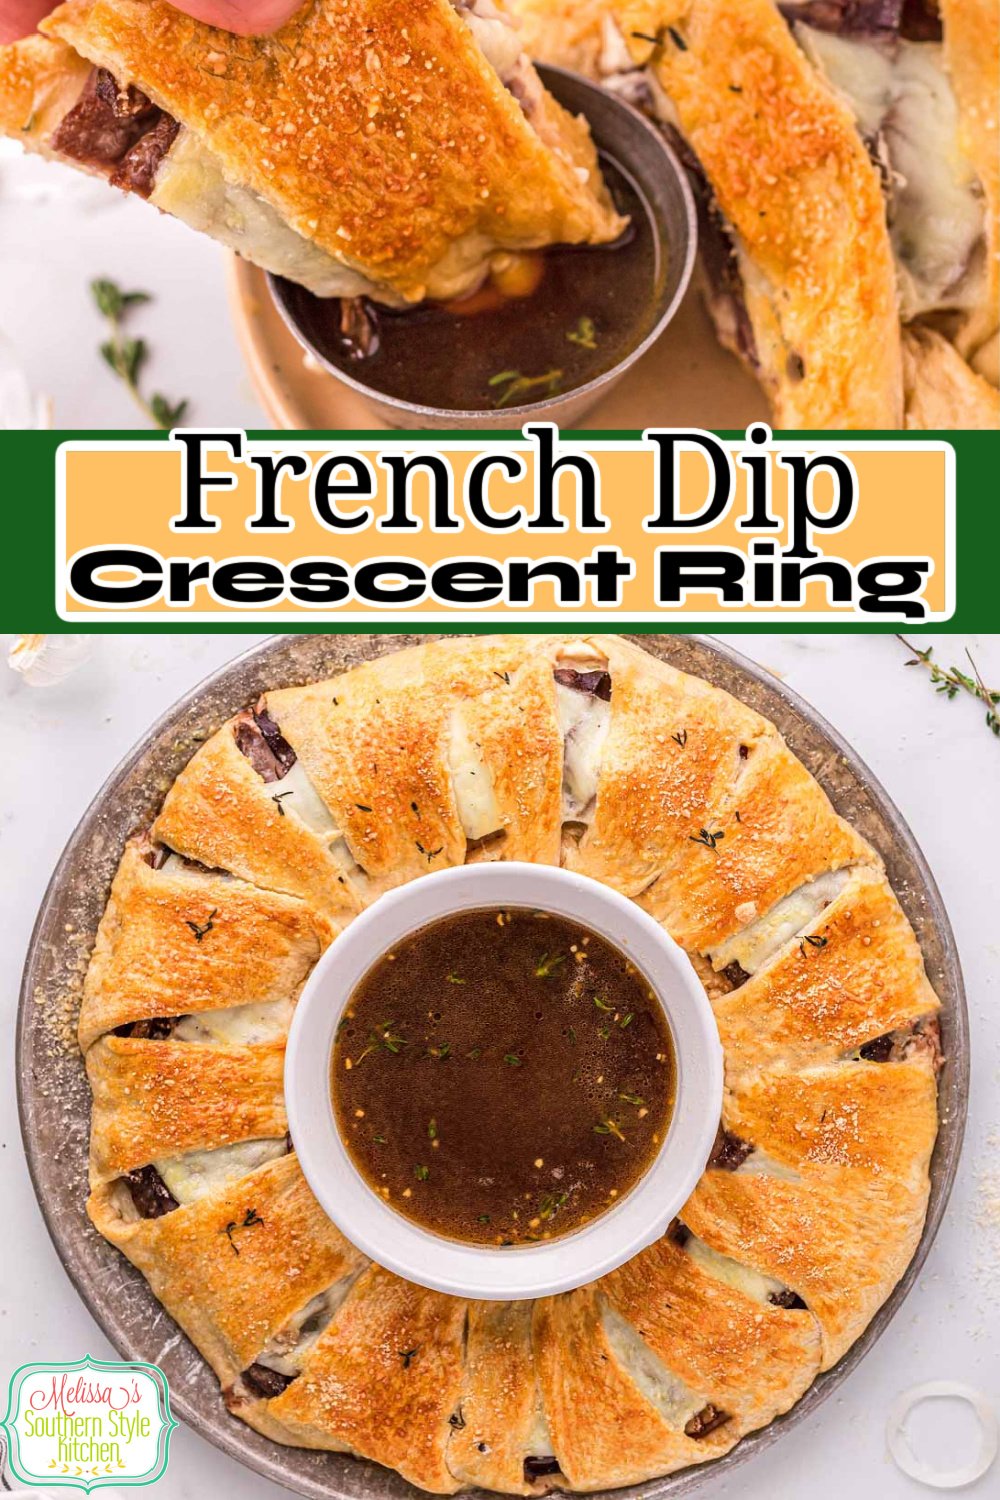 Serve French dips in an unexpected way with this French Dip Crescent Ring topped caramelized onions and au jus for dipping #frenchdips #roastbeef #frenchdiprecipes #crescentrings #crescentrolls #crescentrollrecipes #southernstyle #appetizers #gamedayrecipes via @melissasssk